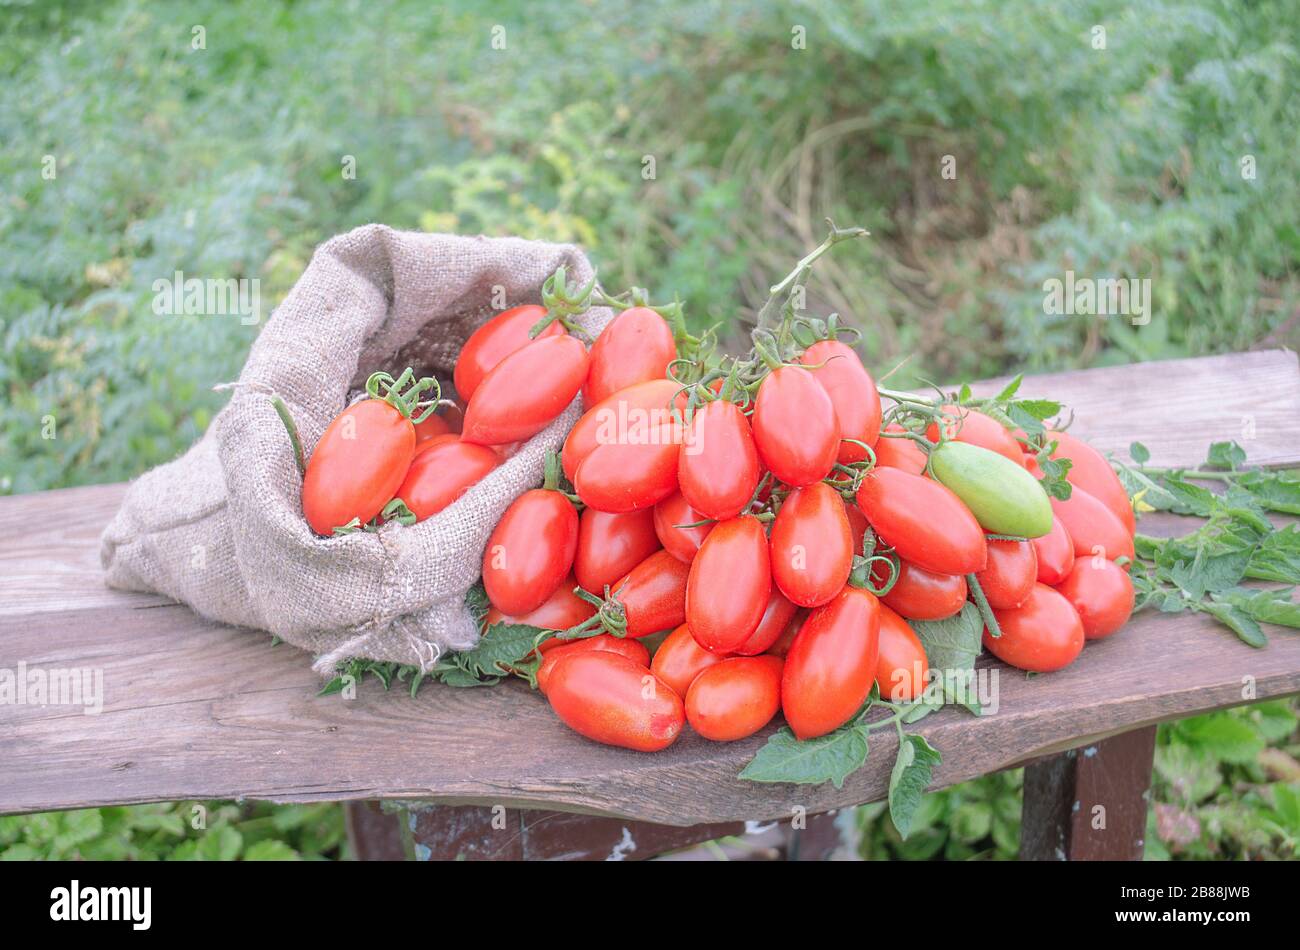 Fruits have a deep red color. A productive plum tomato Stock Photo